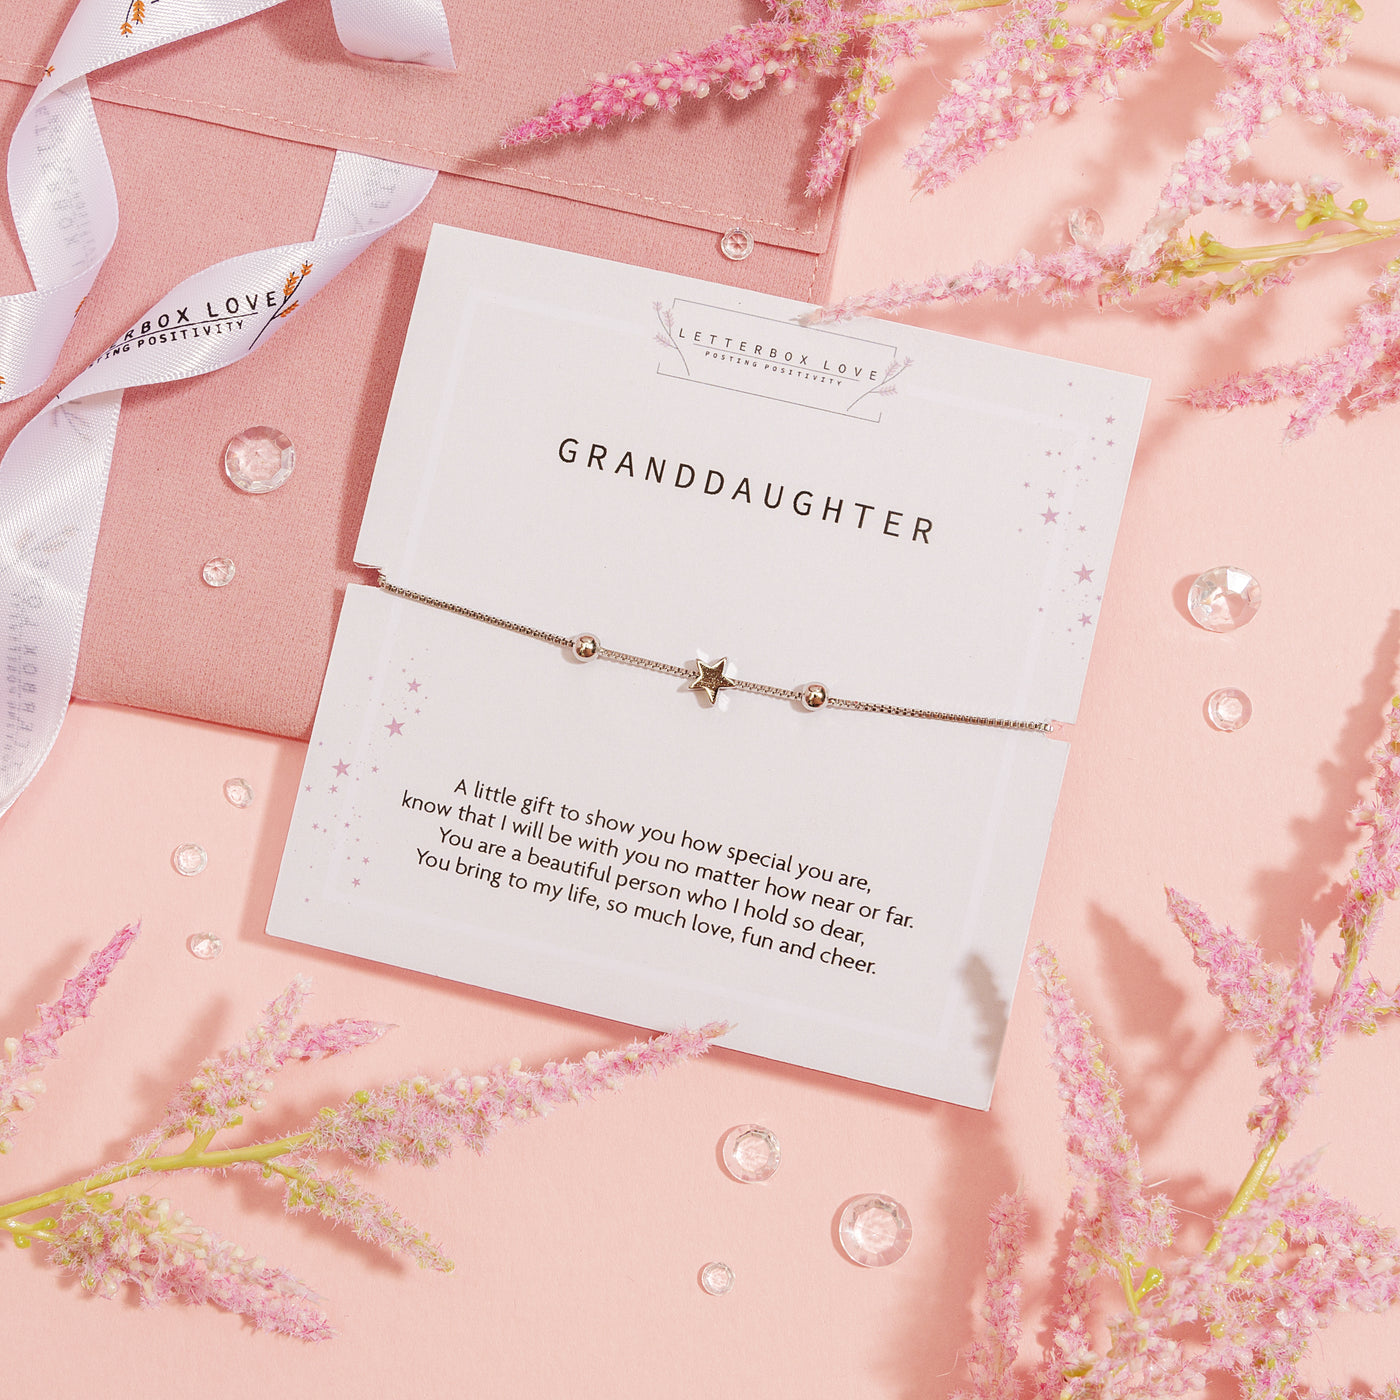 A delicate bracelet gift for a granddaughter, presented on a 'Letterbox Love' card with a touching poem. The bracelet features a central star charm flanked by two small beads on a silver chain, symbolizing love and guidance. The card and bracelet are designed with a subtle pink starry background, conveying affection and tenderness.